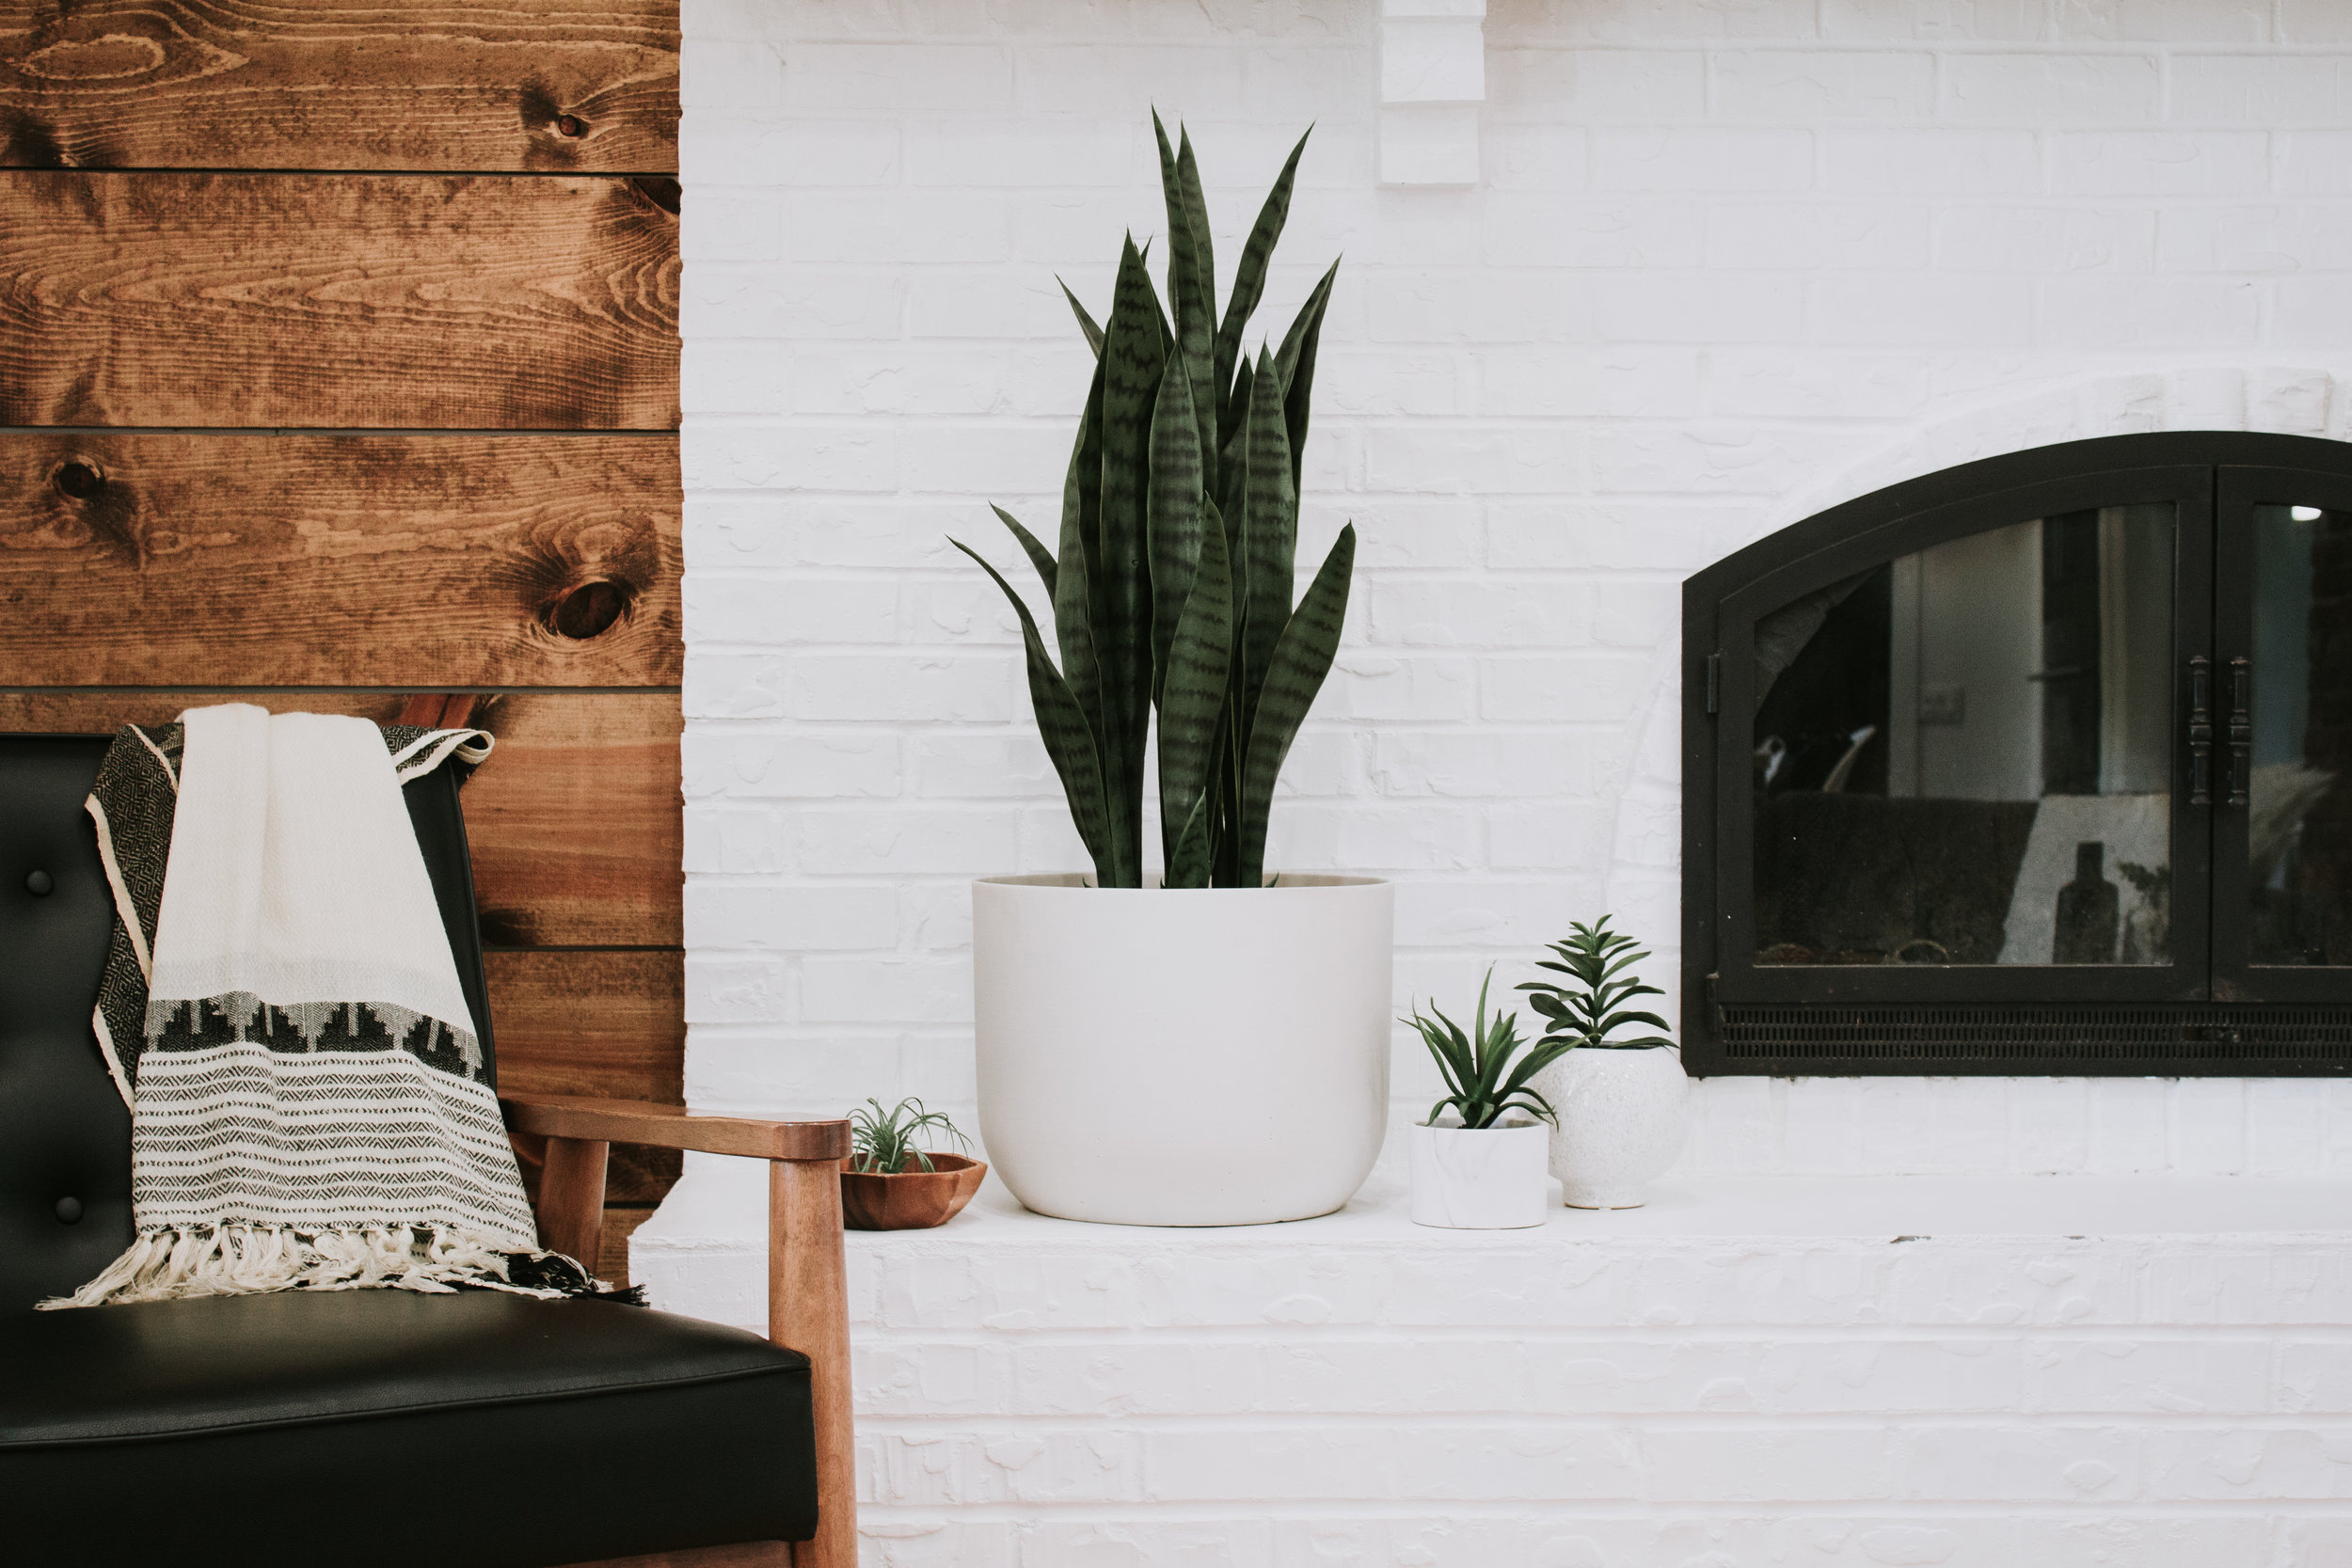 9 Faux Plants That Actually Look Real - Fiddle Leaf Fig, snake plant, birds of paradise palm tree, banana leaf tree, succulents, and faux stems. Fake indoor plants by Nadine Stay